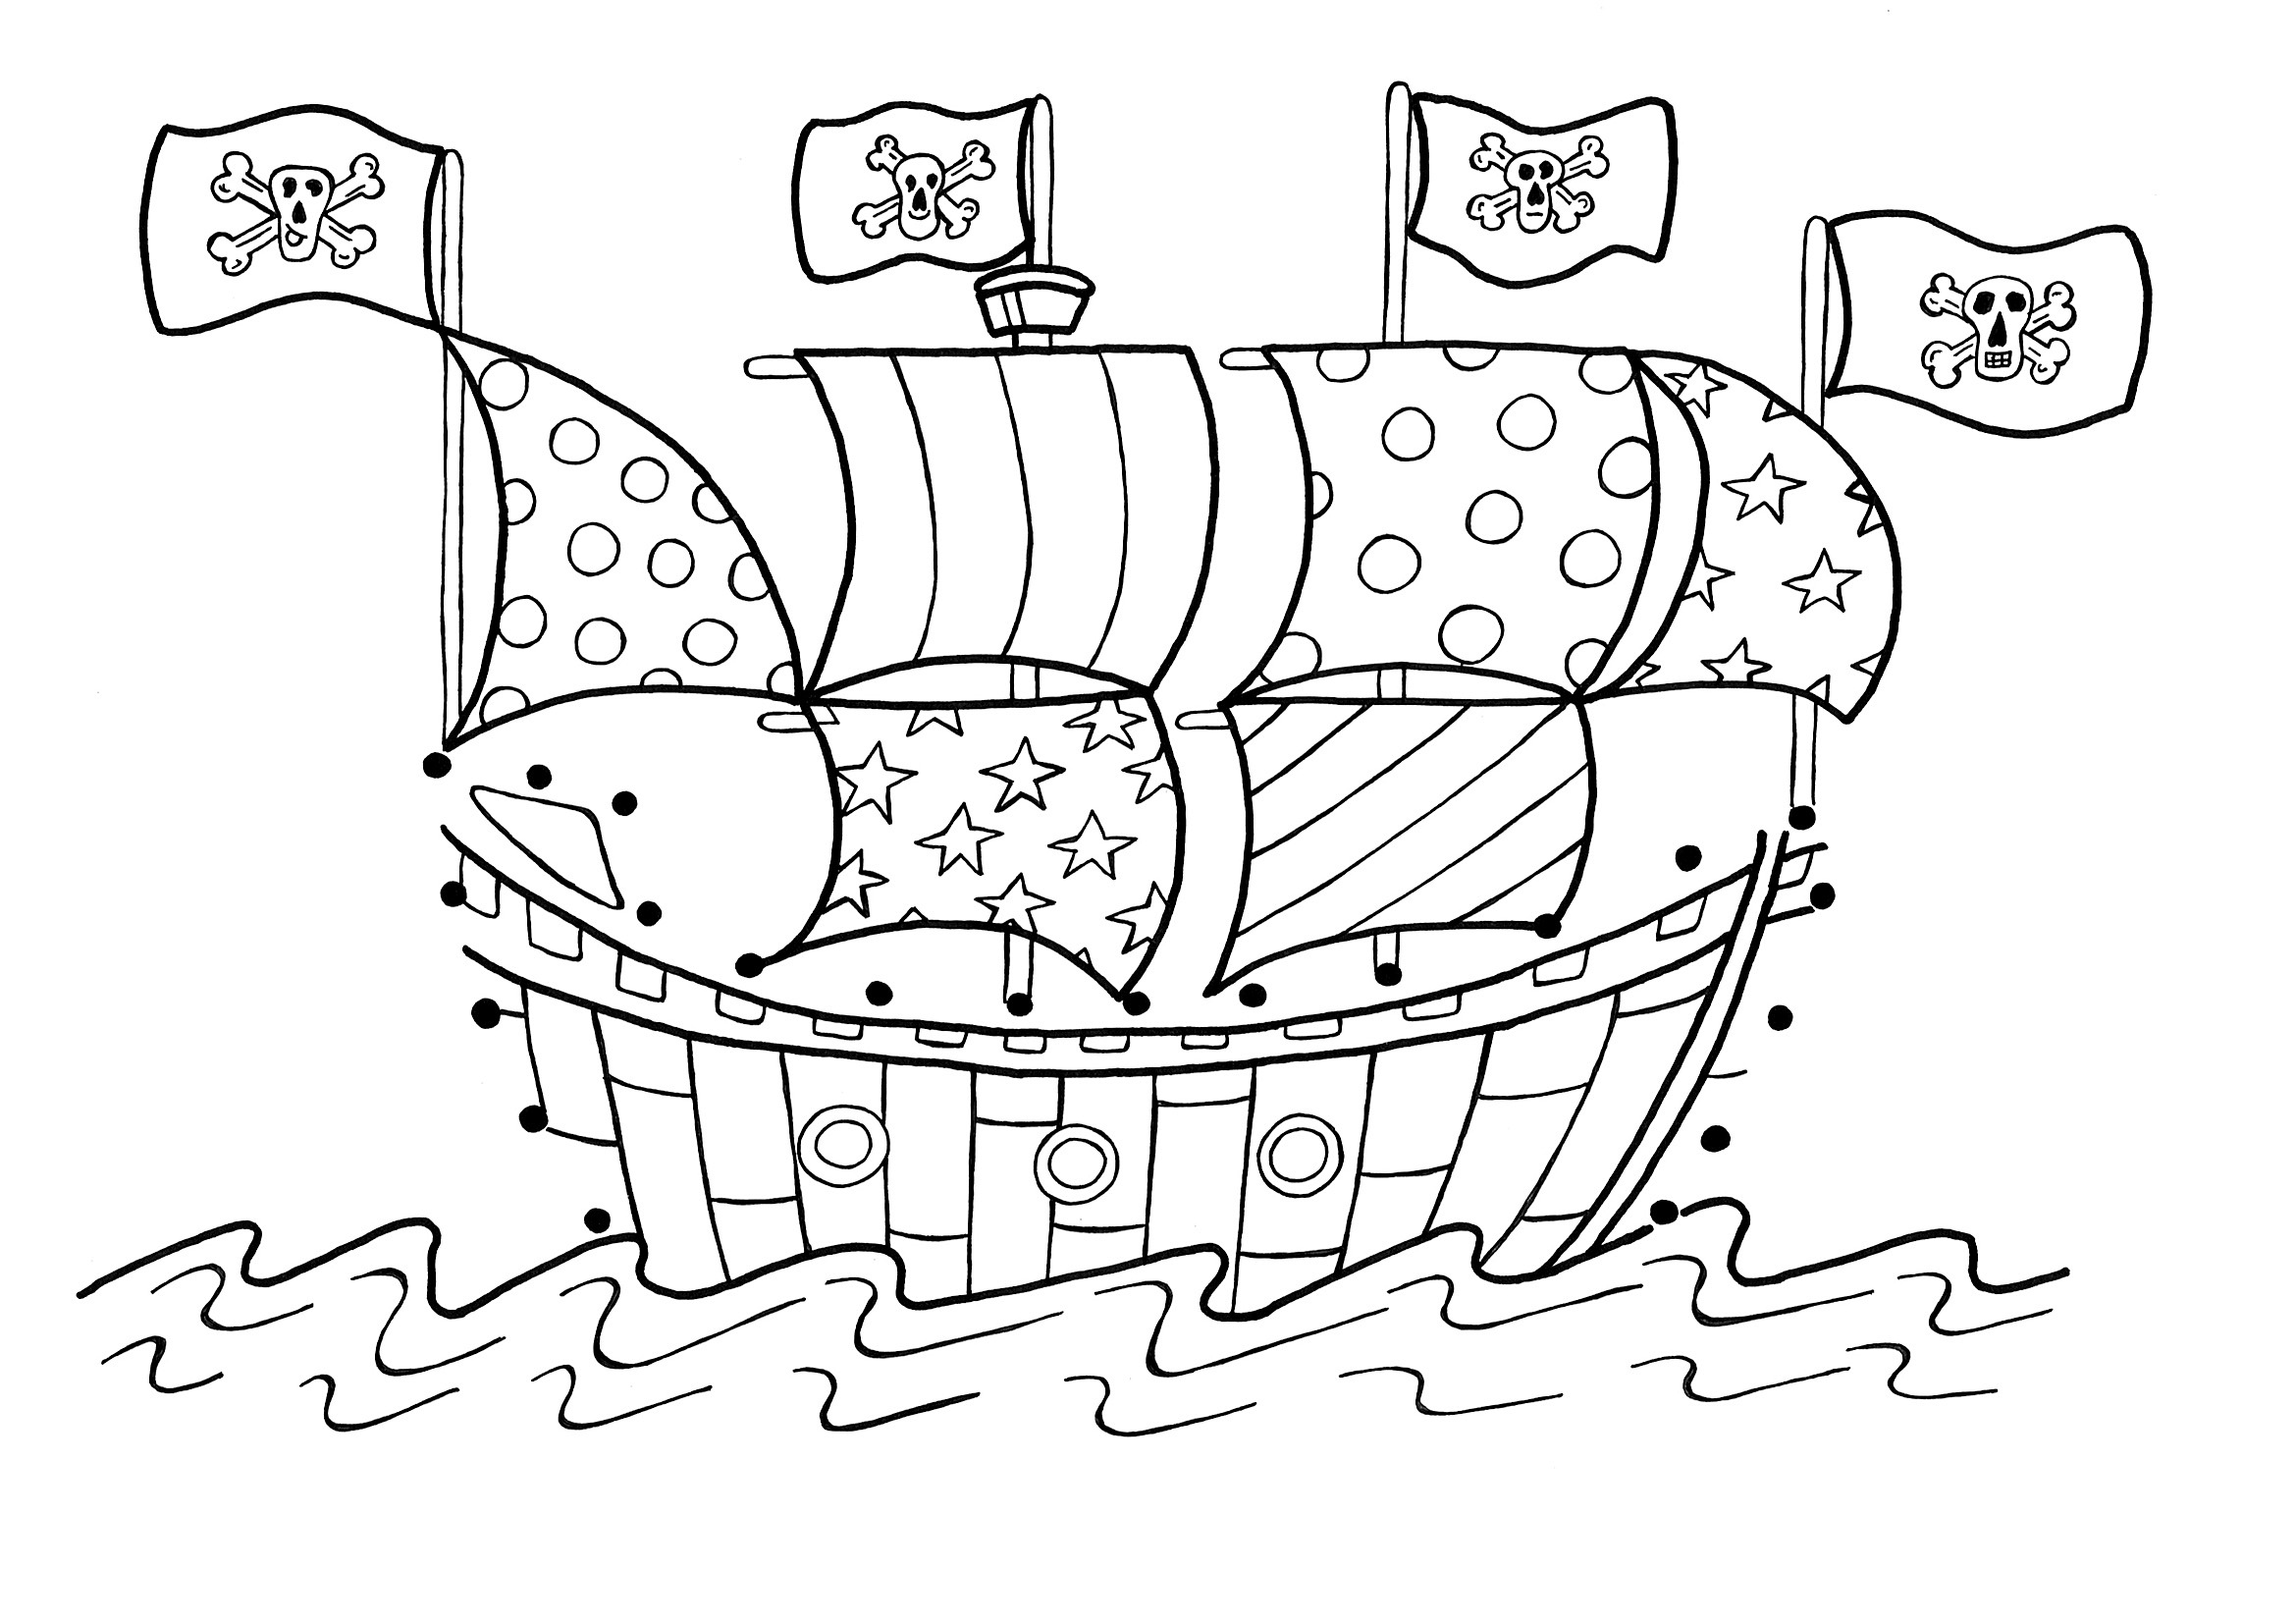  Coloring Pirate Ship Coloring Pages for Kids | Print Coloring Pages